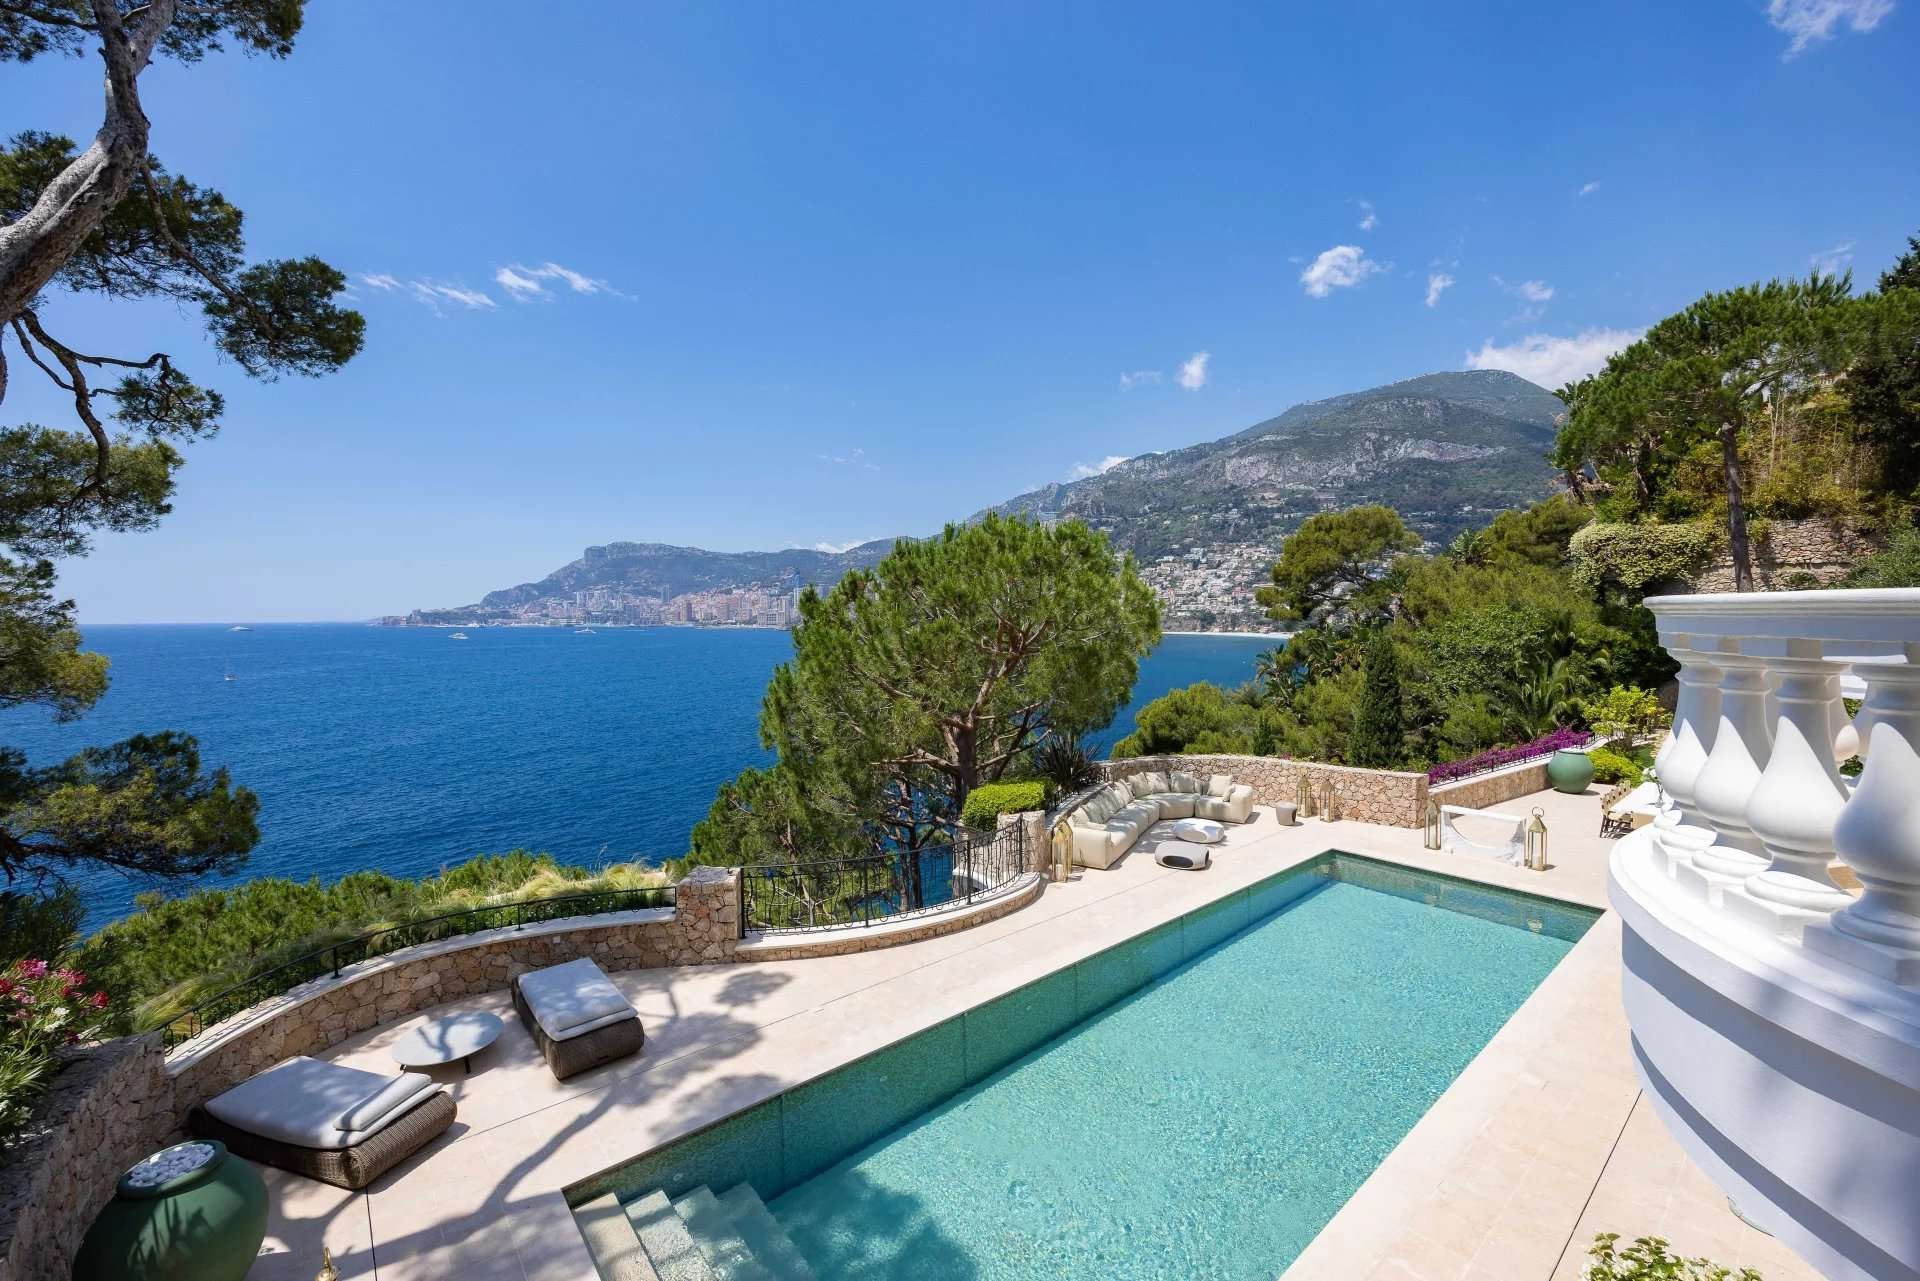 Francis York Belle Epoque Villa on The French Riviera With Views Over Monaco 9.jpg